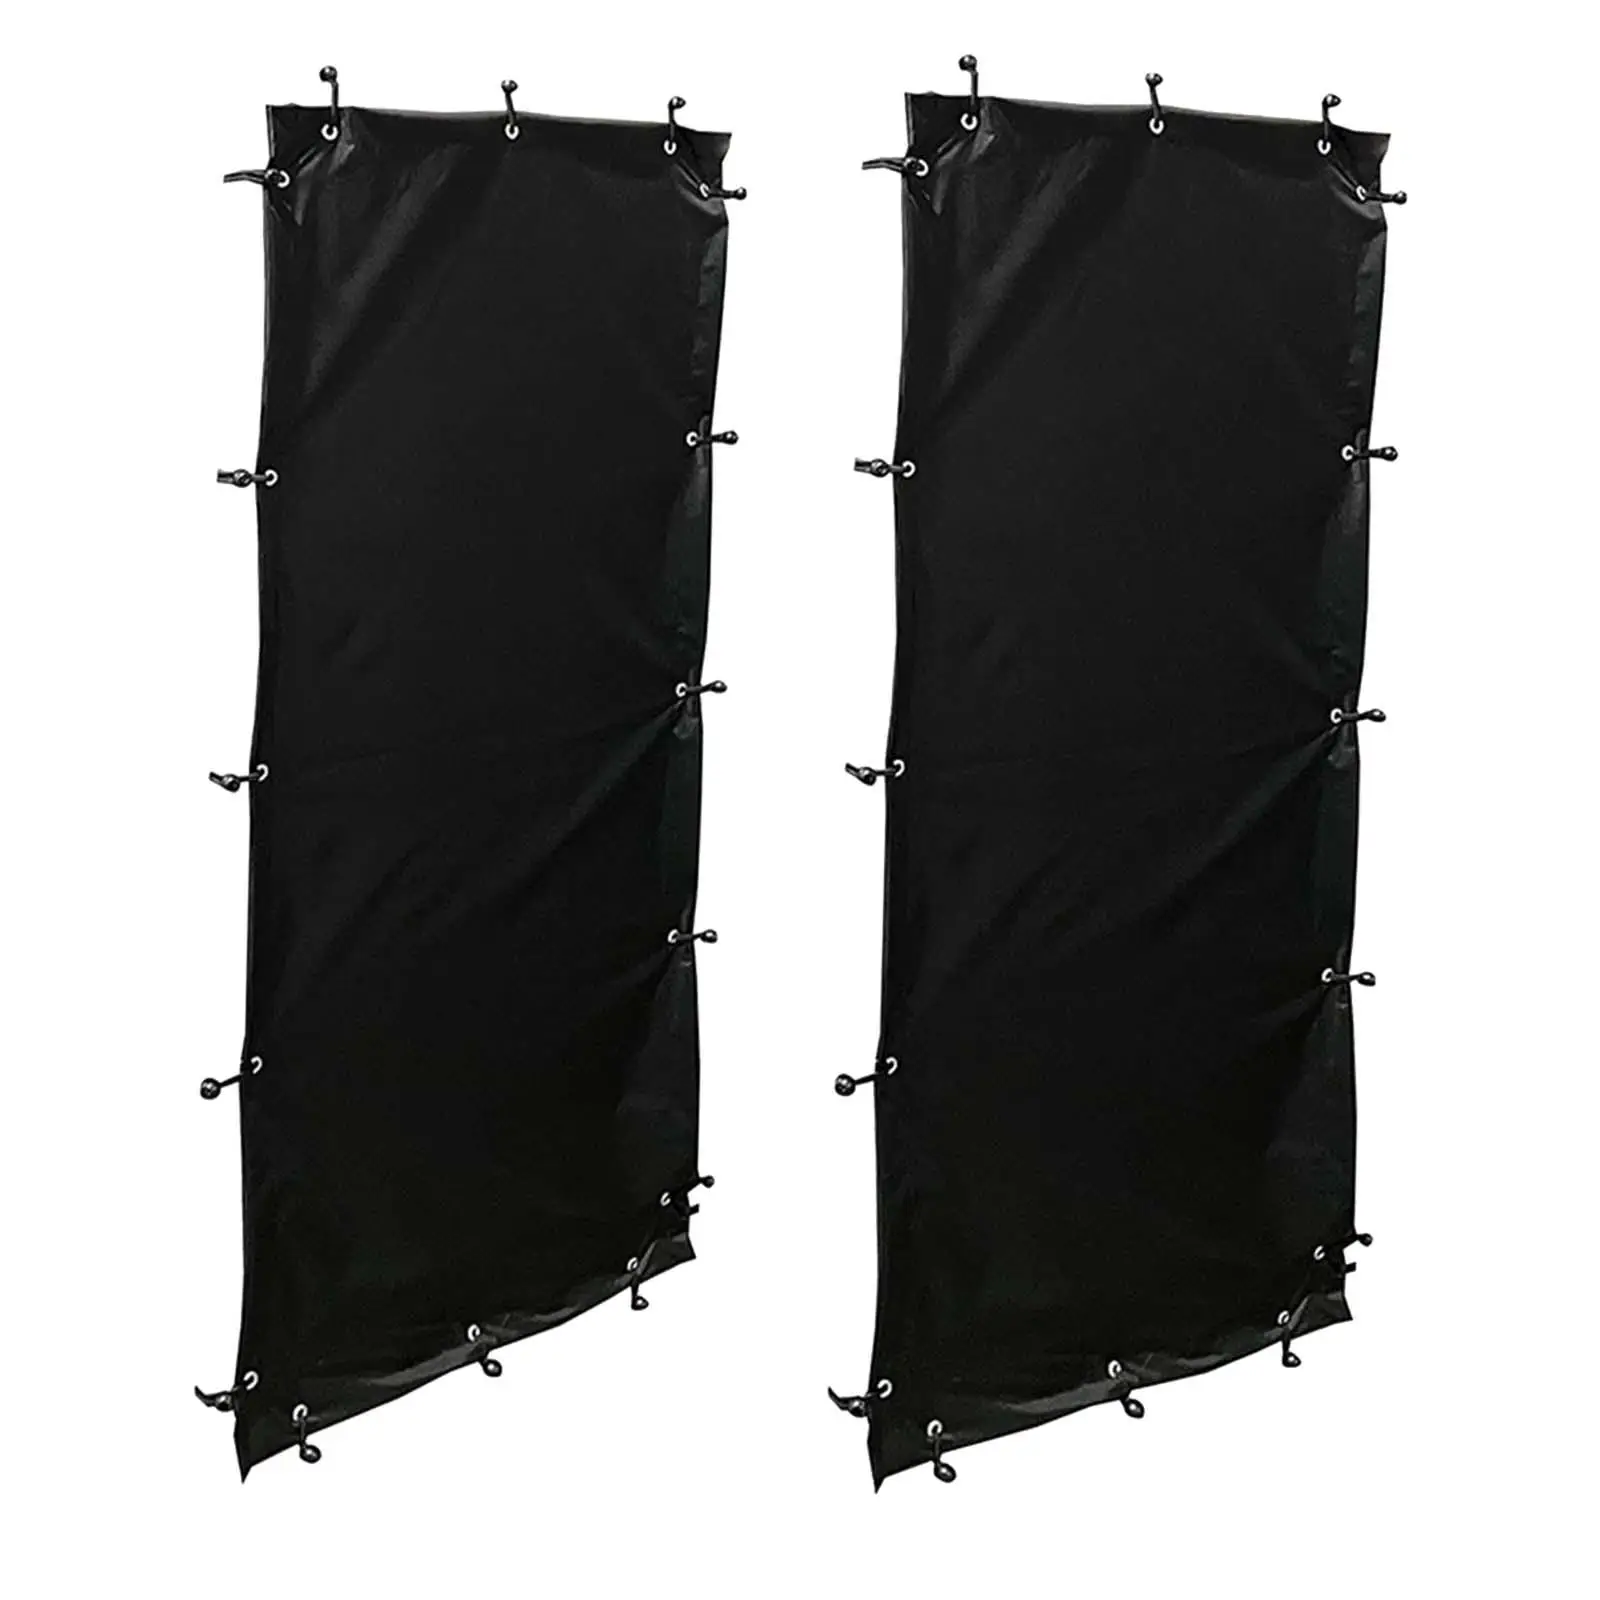 2x Weatherproof Curtain for Firewood Rack 2 Sides Firewood Cover Windproof Waterproof Wood Log Protector for Outdoor Camping BBQ